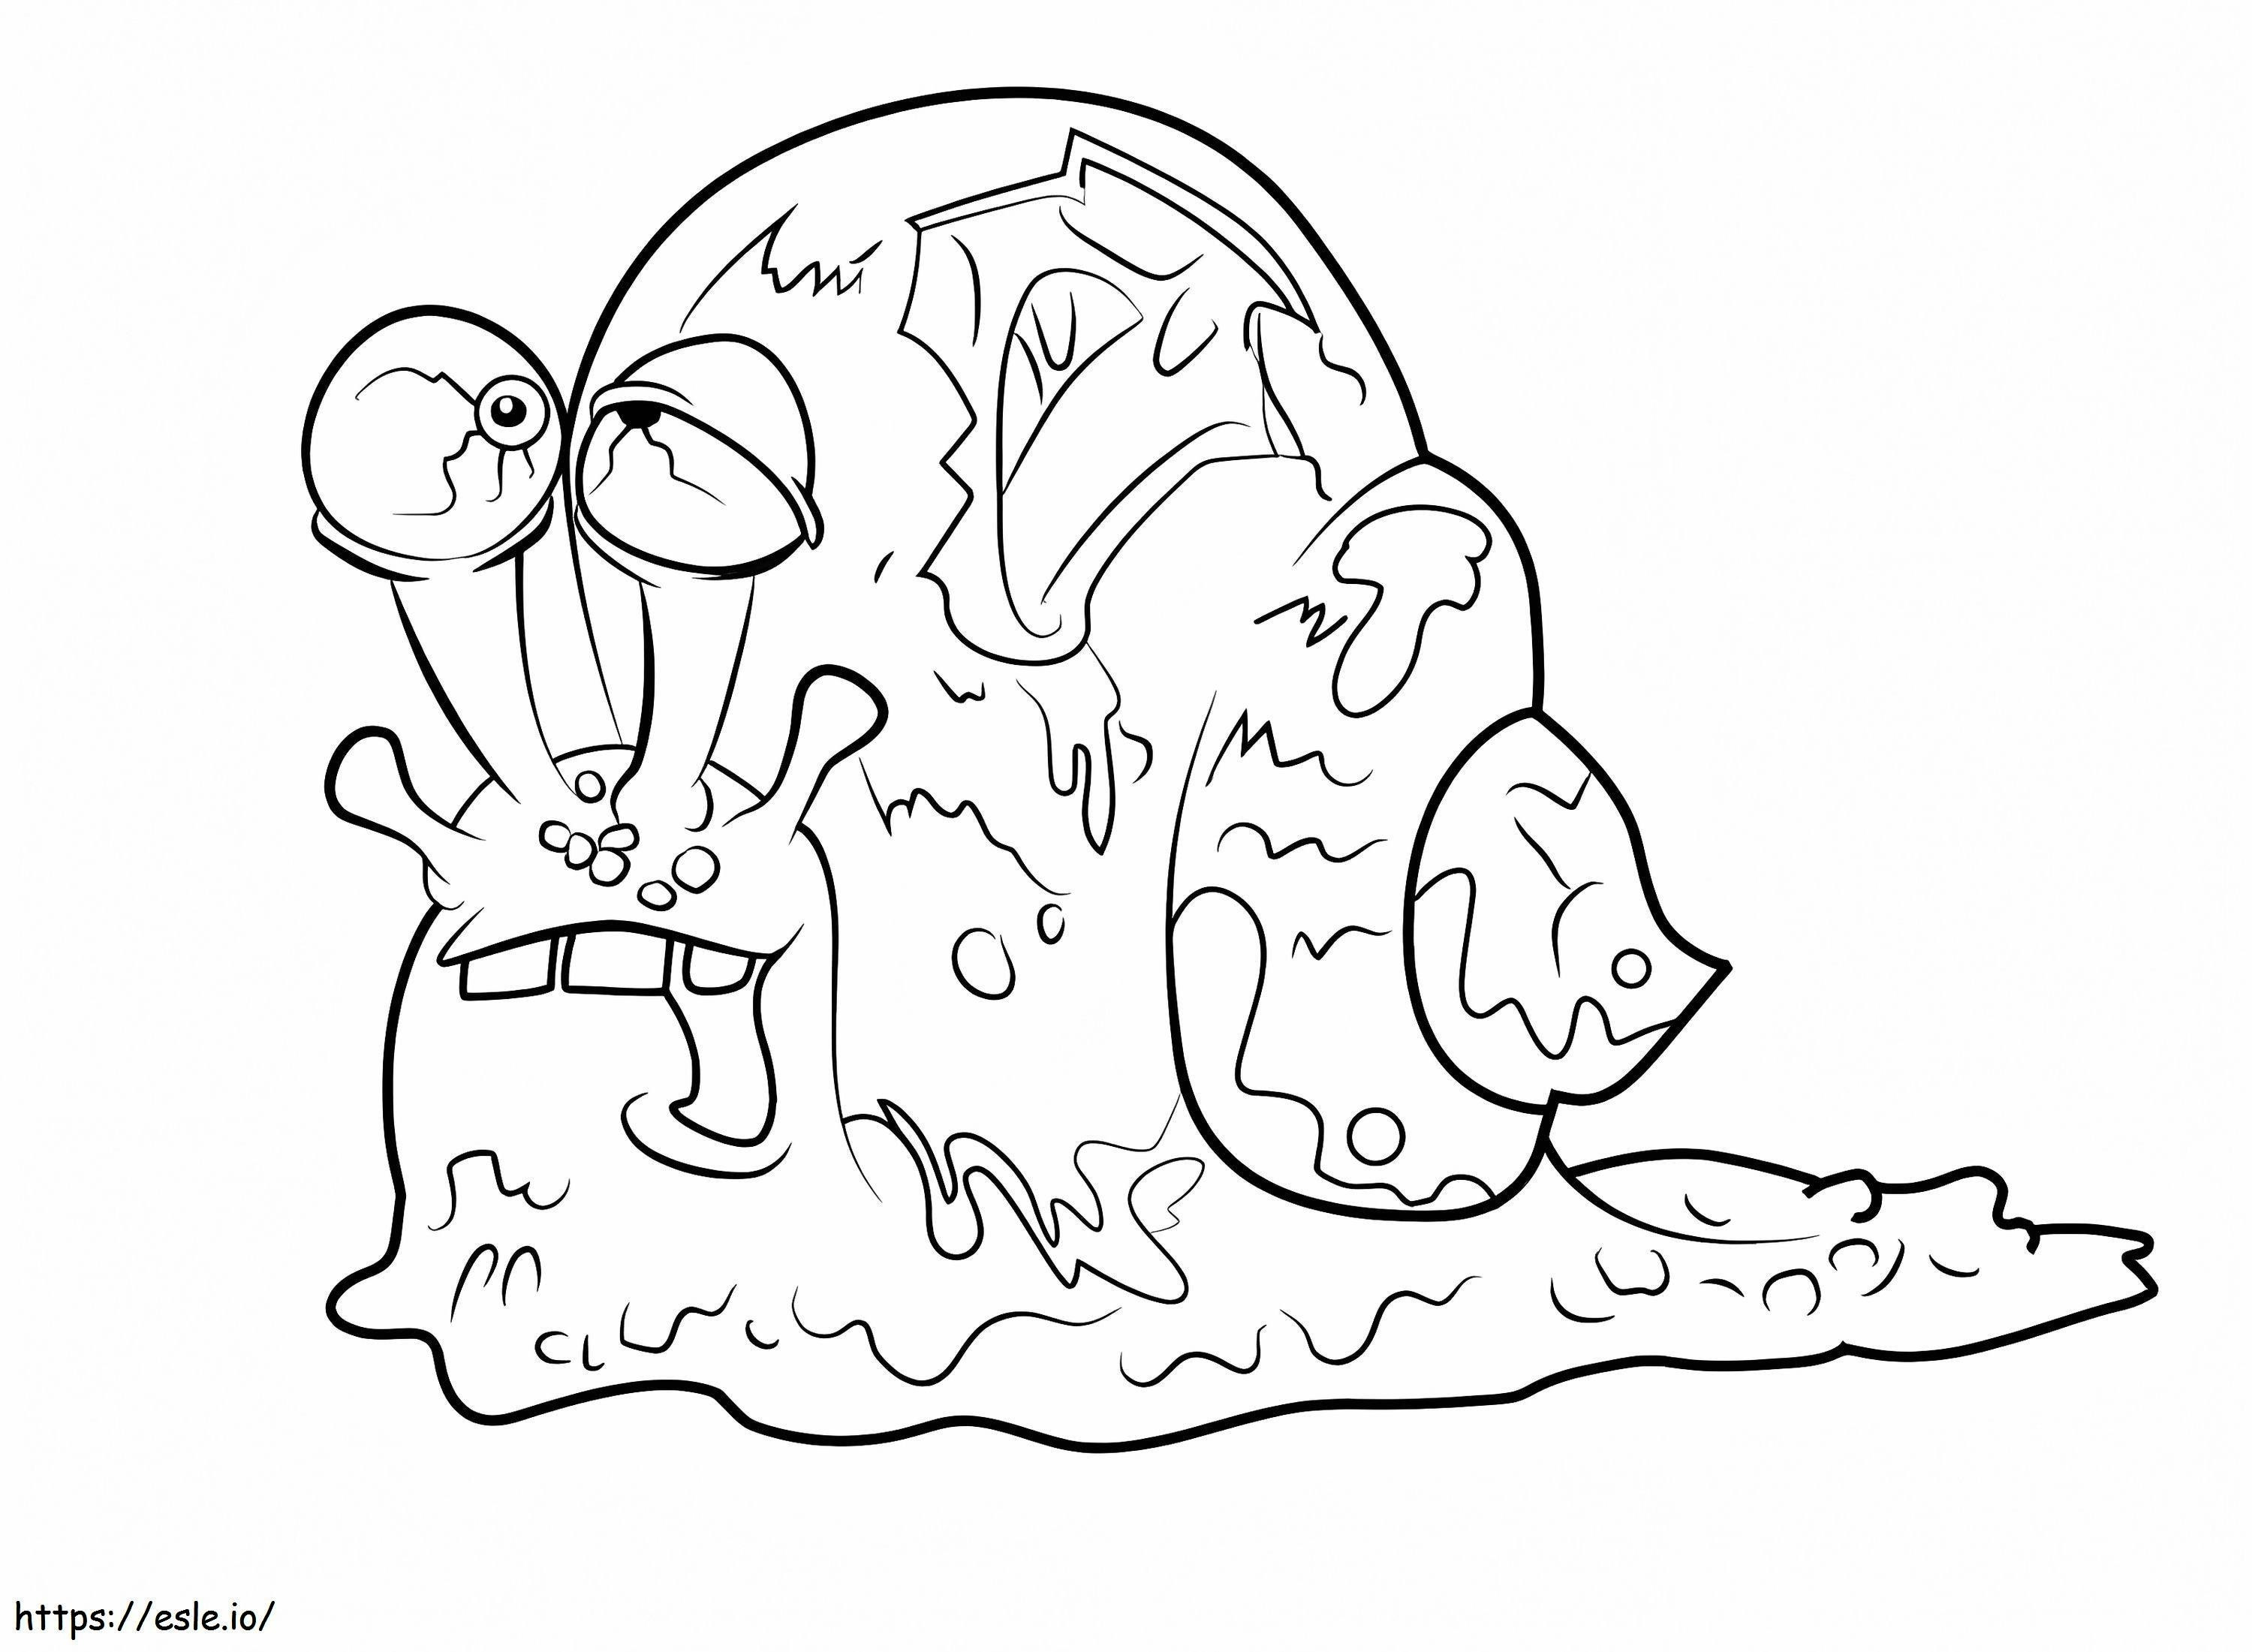 Shell Shocked Snail coloring page